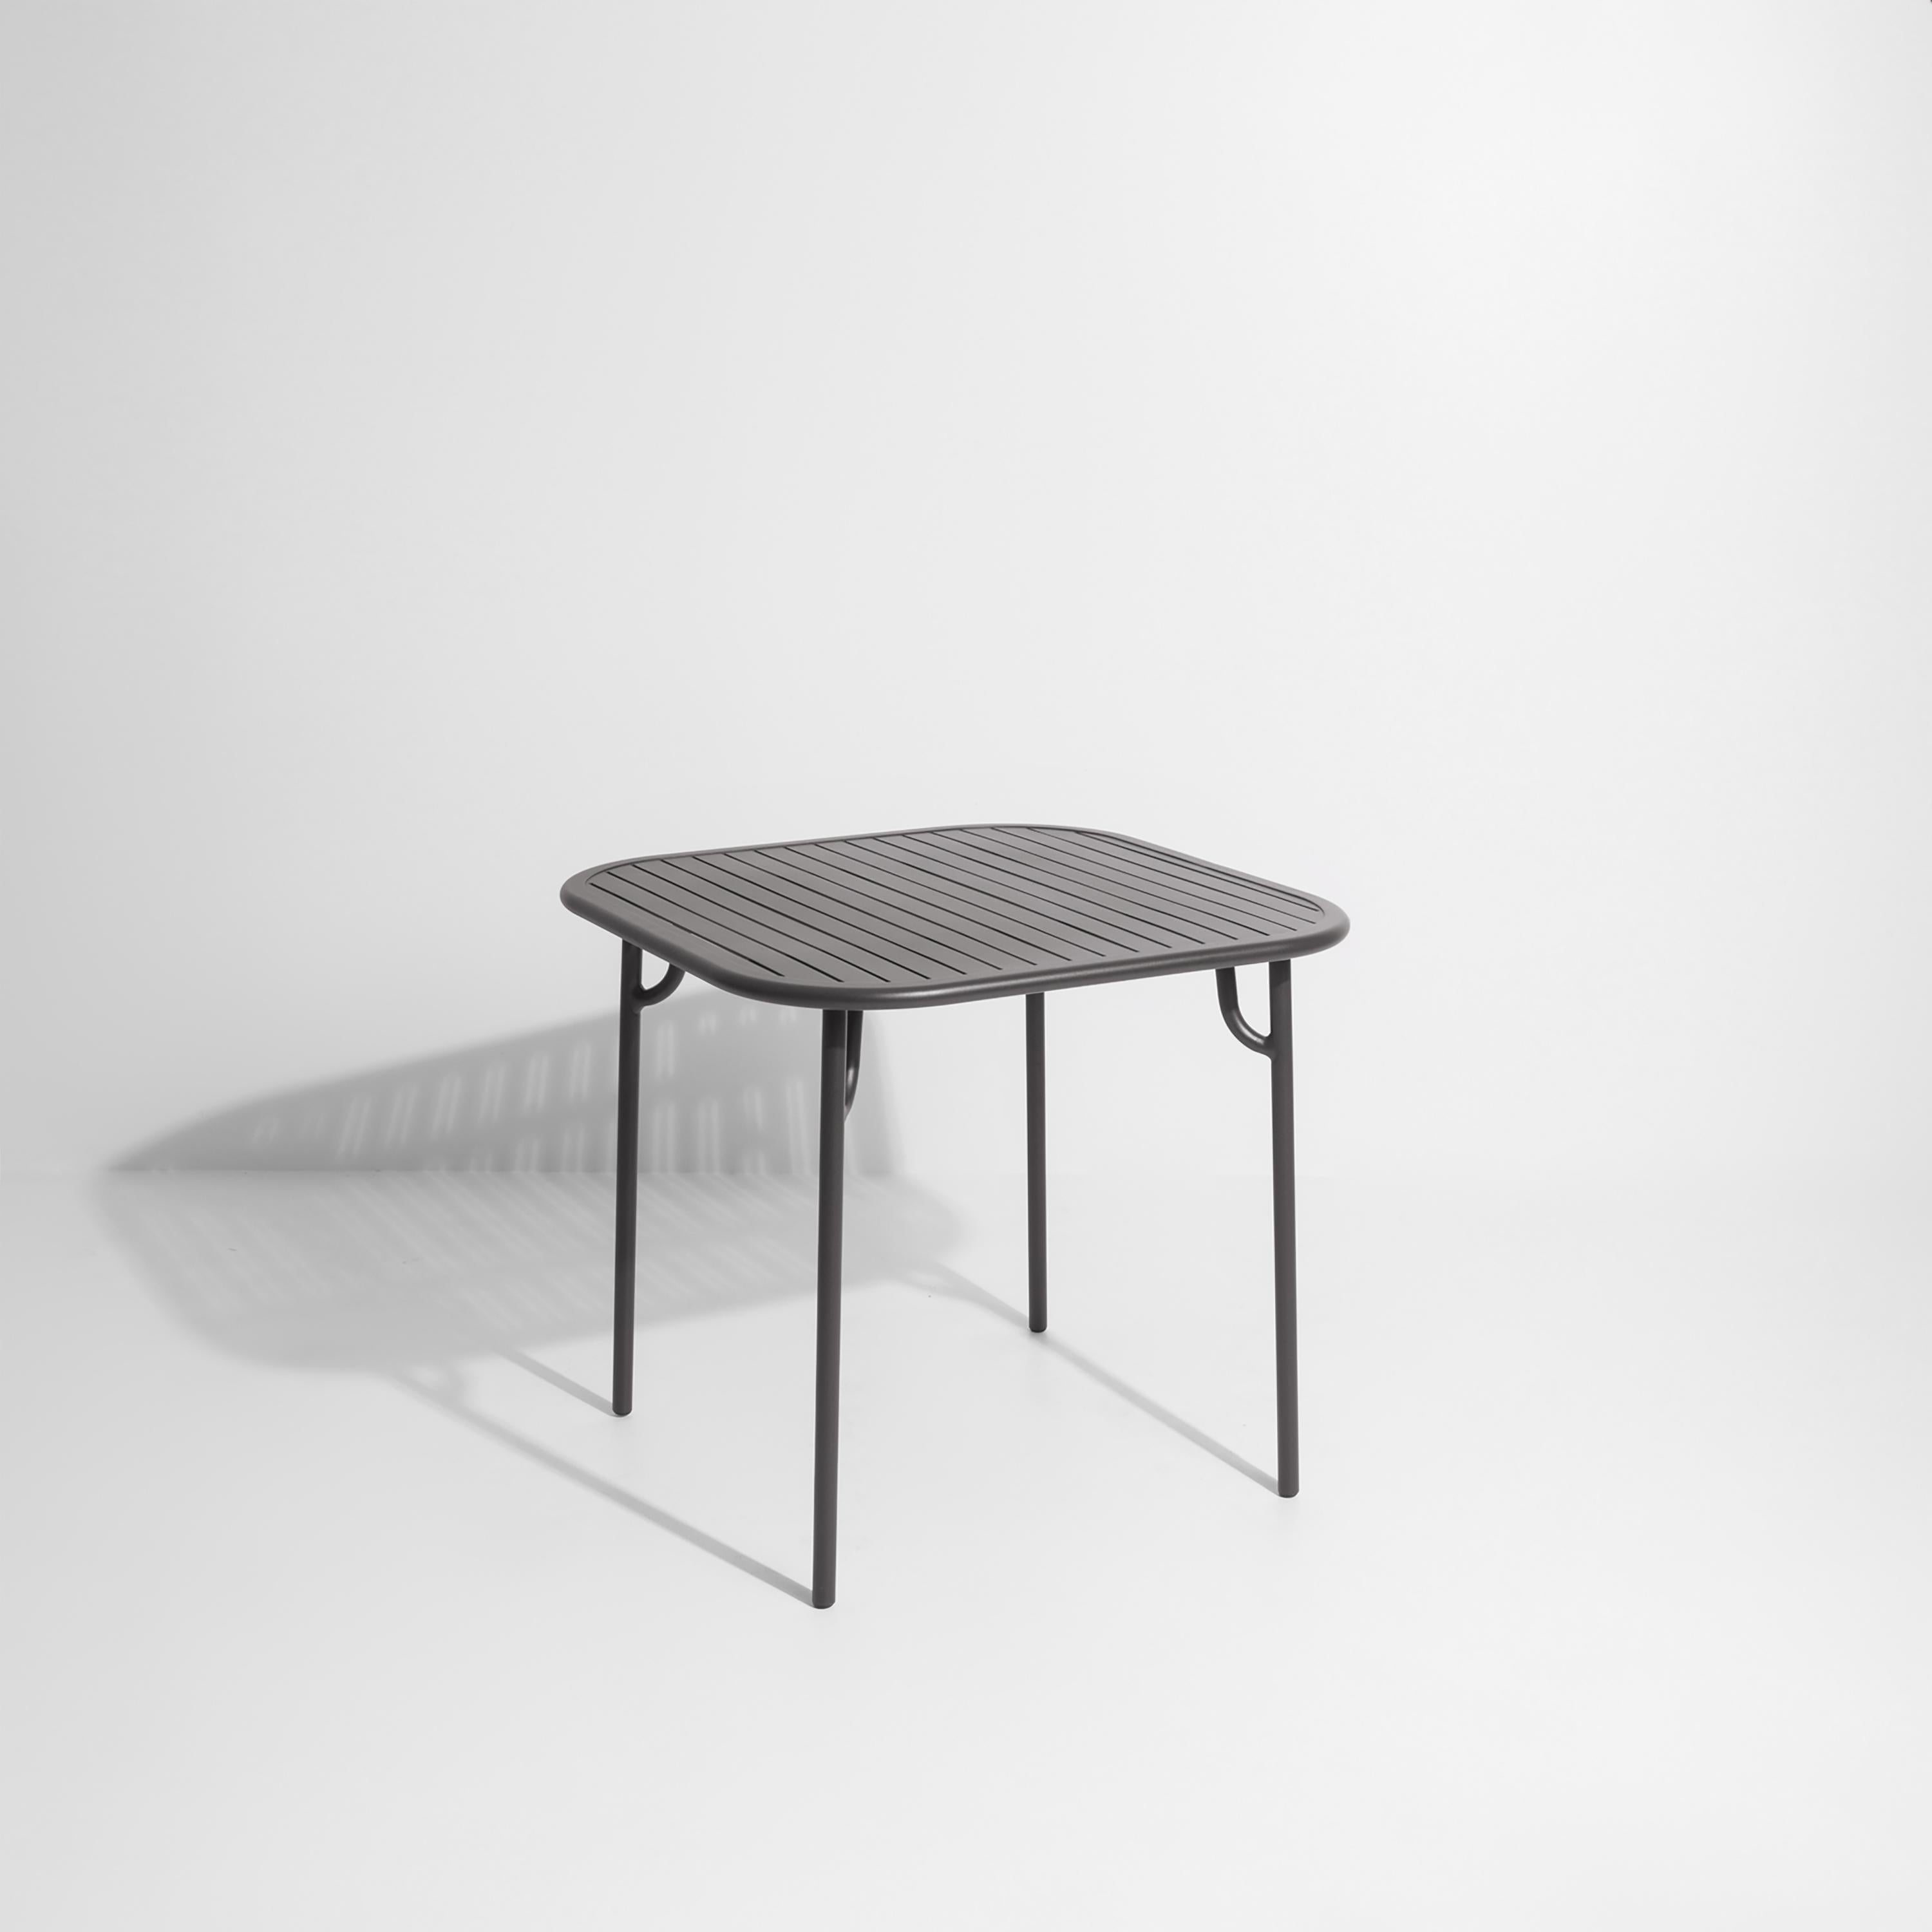 Petite Friture Week-End Square Dining Table in Anthracite Aluminium with Slats by Studio BrichetZiegler, 2017

The week-end collection is a full range of outdoor furniture, in aluminium grained epoxy paint, matt finish, that includes 18 functions